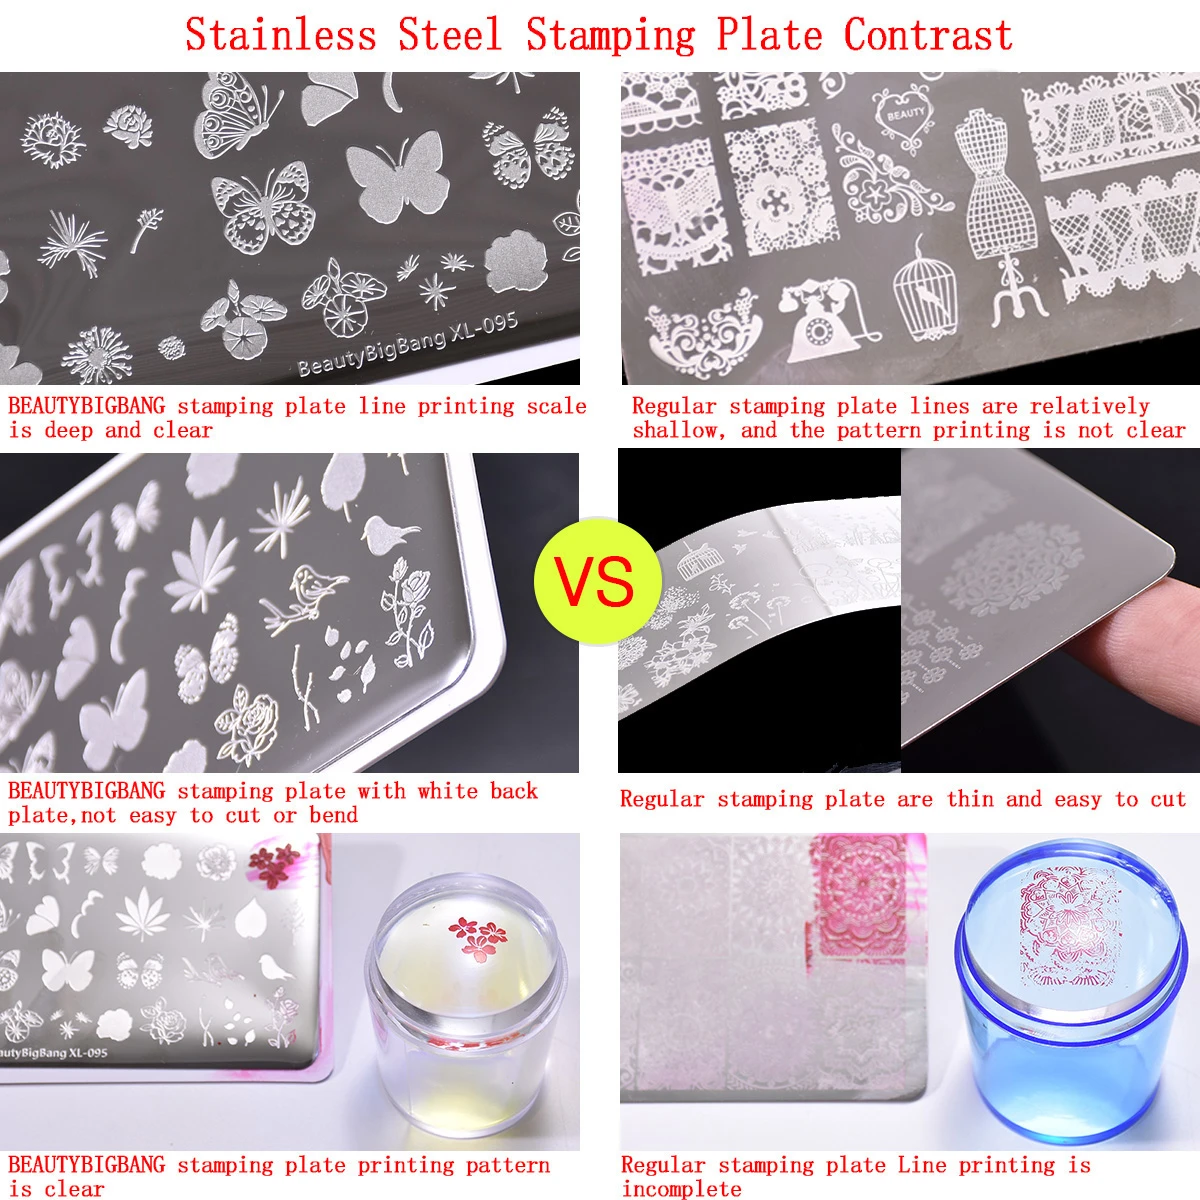 Beauty Big Bang Stamping Plates New Characters XL-001 Simple Line Flower Heart Image Stainless Steel Stencil Nail Art Template images - 6